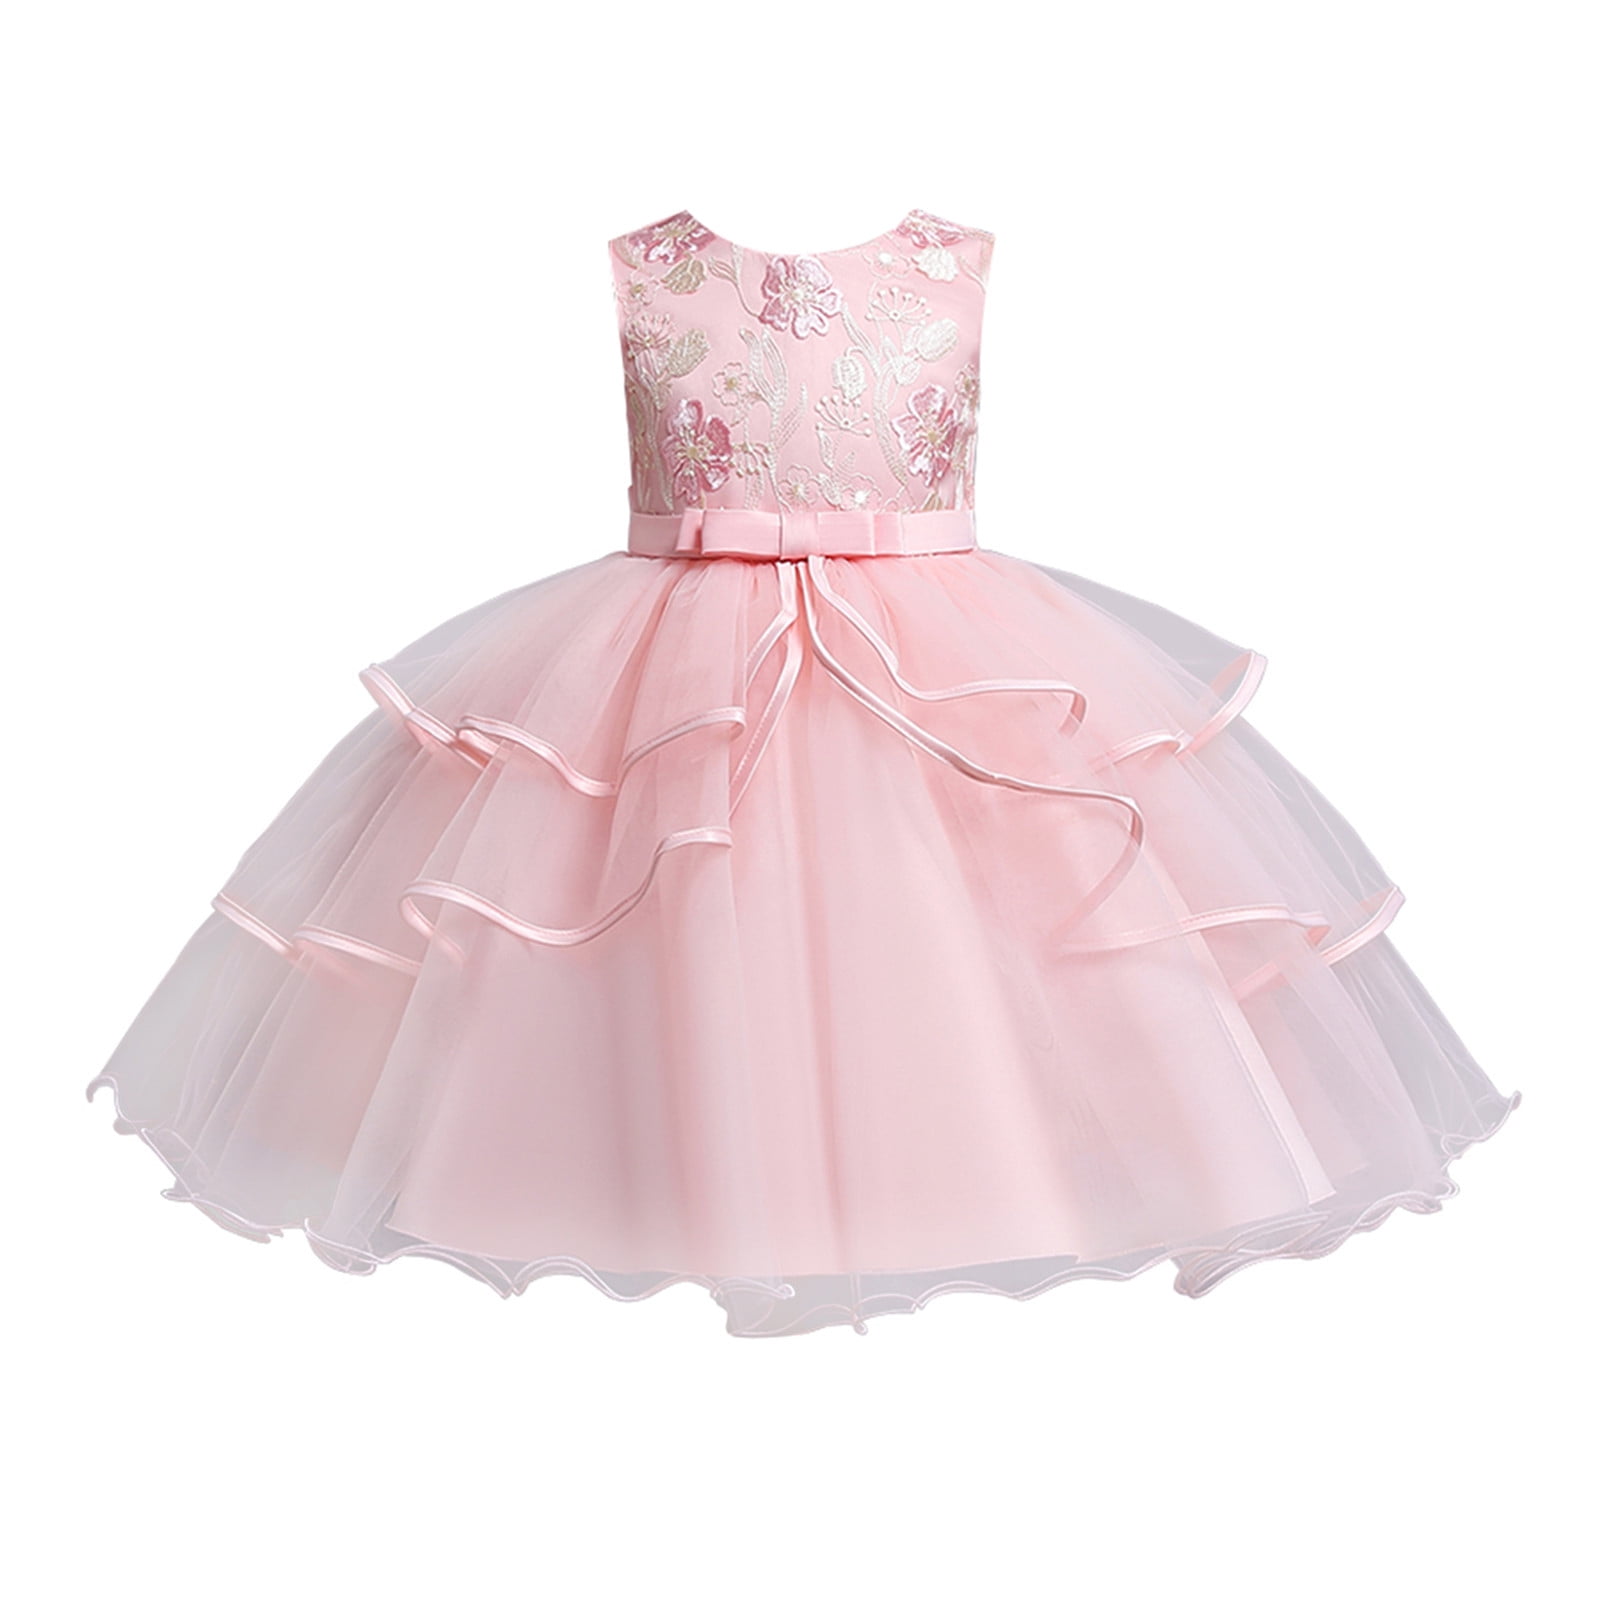 Uuszgmr Flower Girl Dress Sleeveless Toddler Clothes Gown Party ...